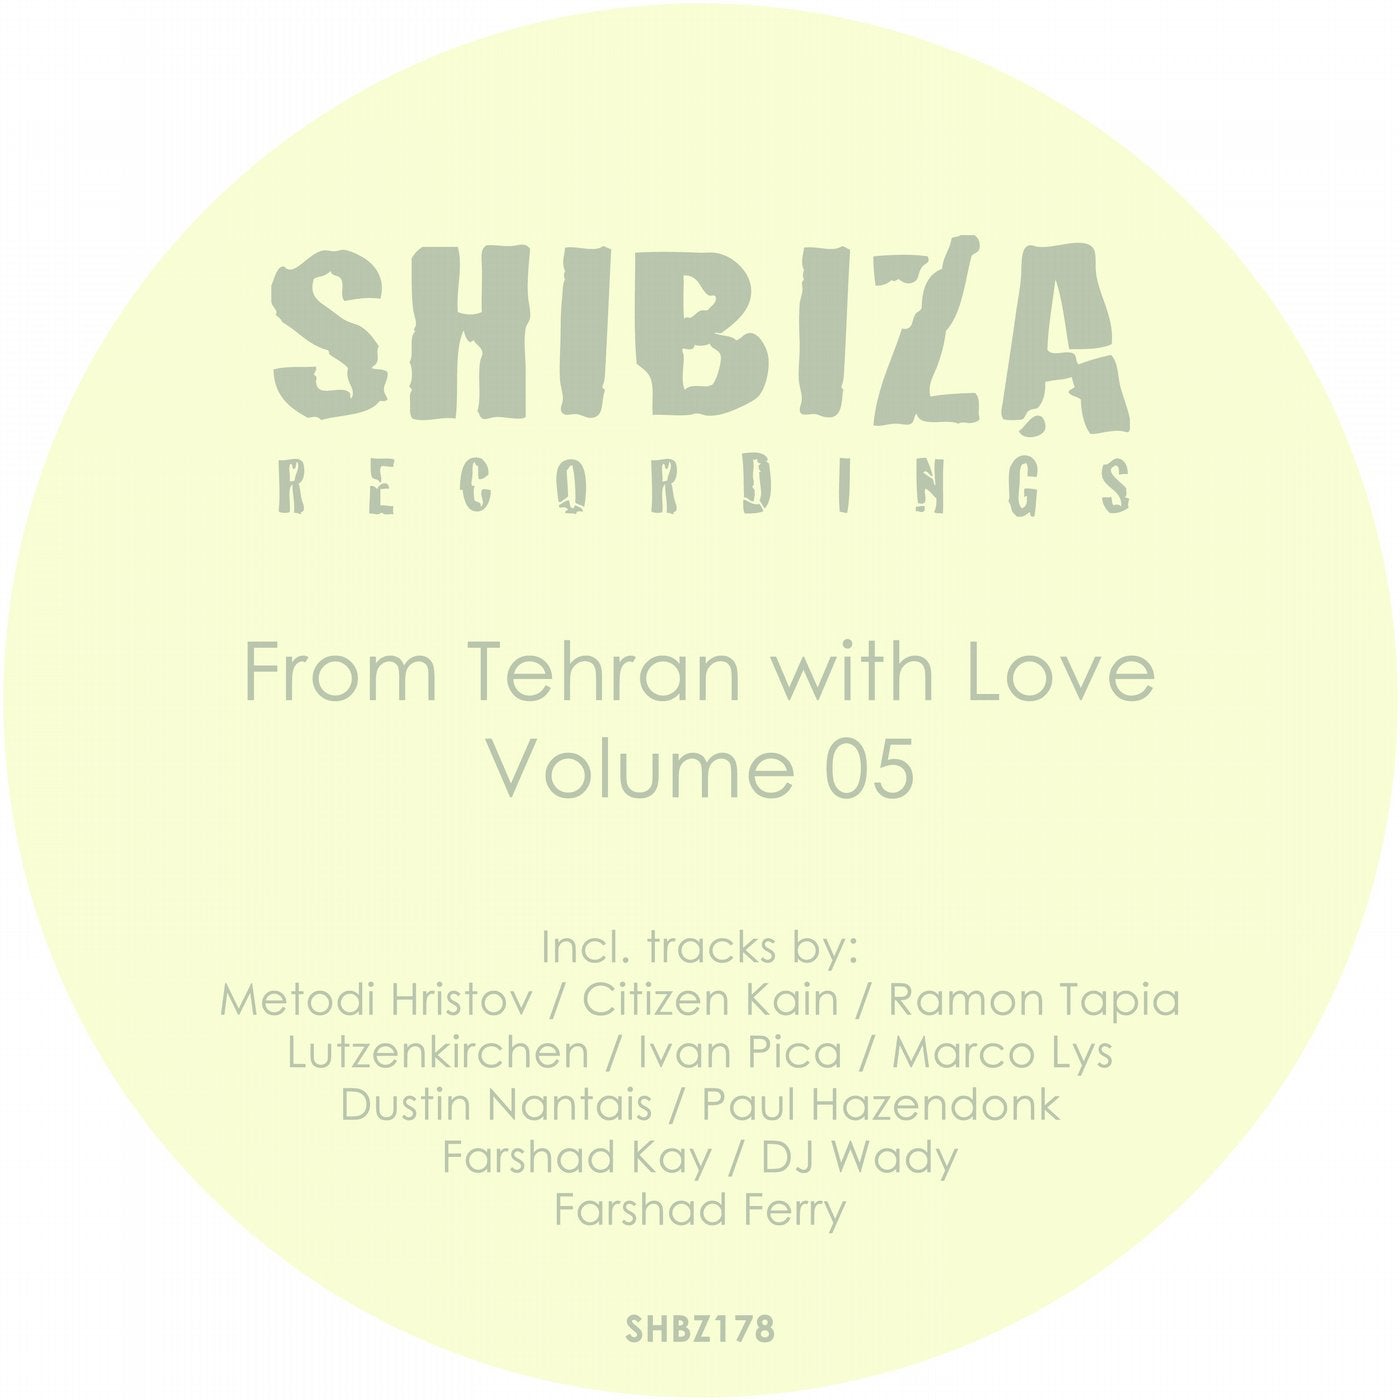 From Tehran with Love, Vol. 05